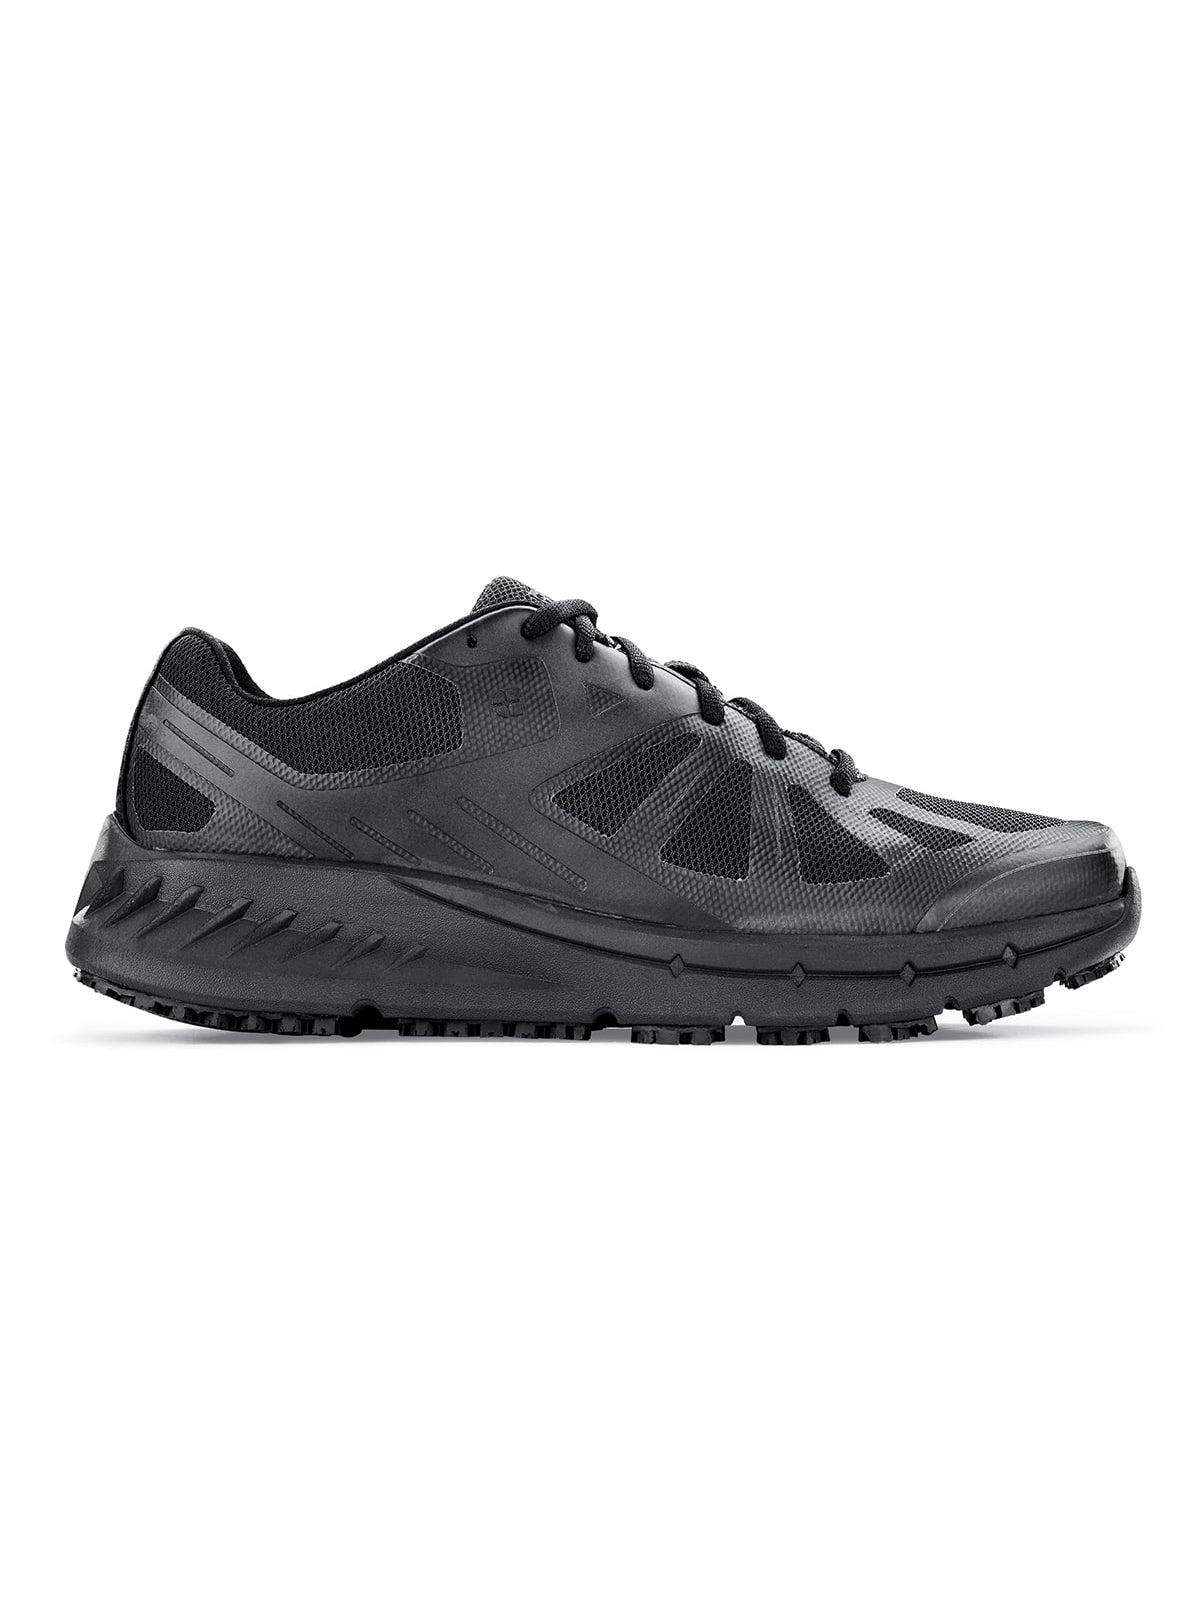 Women's Work Shoe Vitality II Black by Shoes For Crews -  ChefsCotton